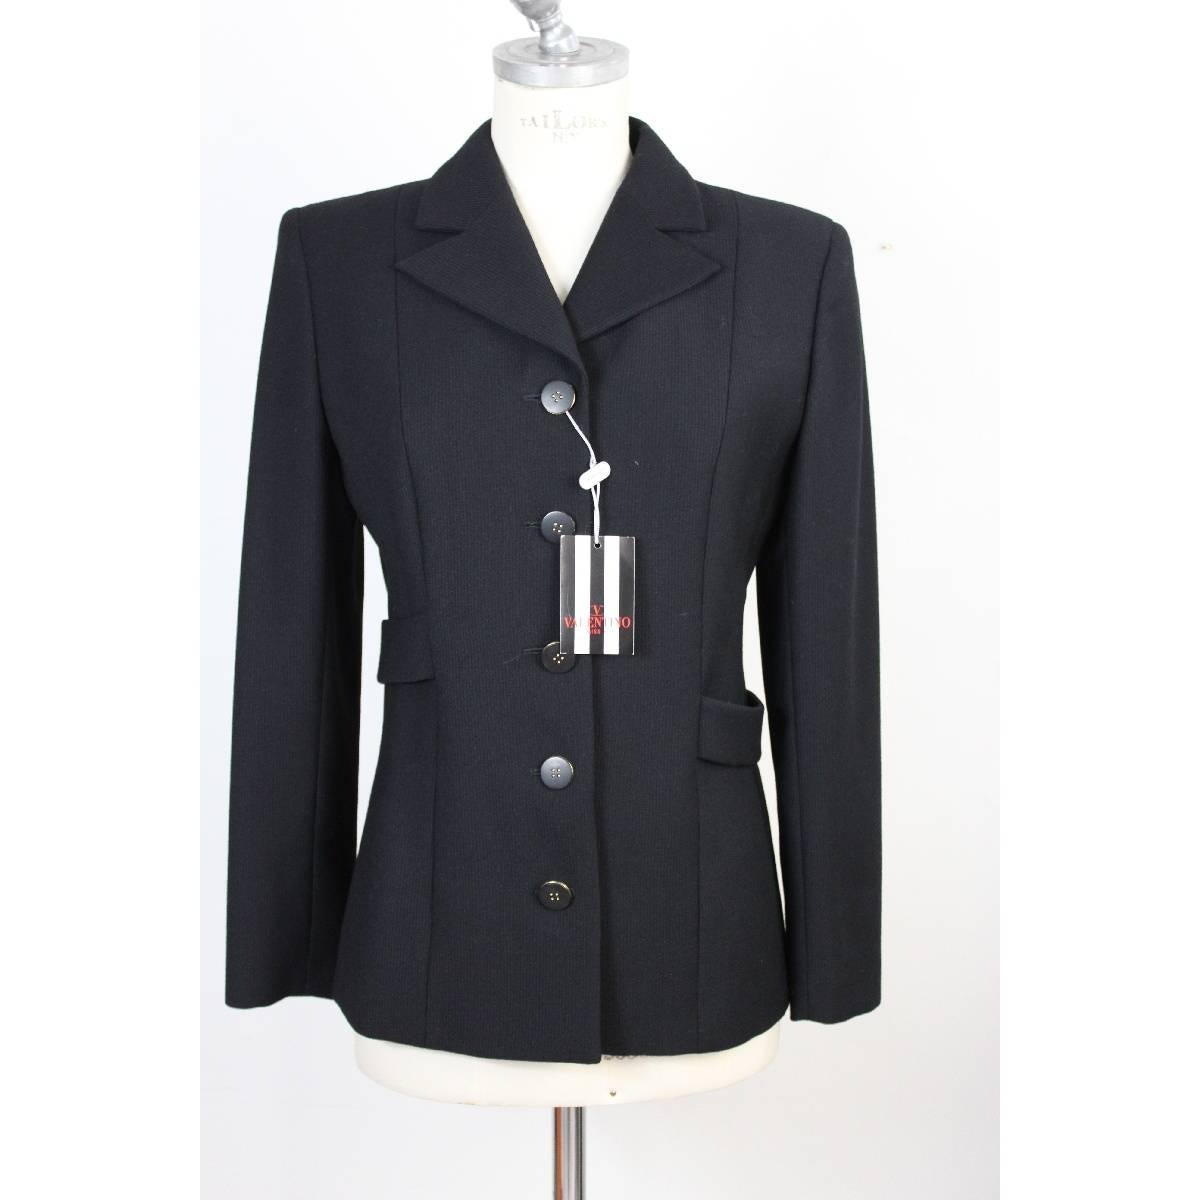 Valentino suit jacket and trousers black pure wool, new with tag. The jacket has a belt behind the back. The pants with raw cut on the hem, two pockets on the sides and band on the length. New with tag. Made Italy

Size 42 It 8 Us 10 Uk

Shoulder: